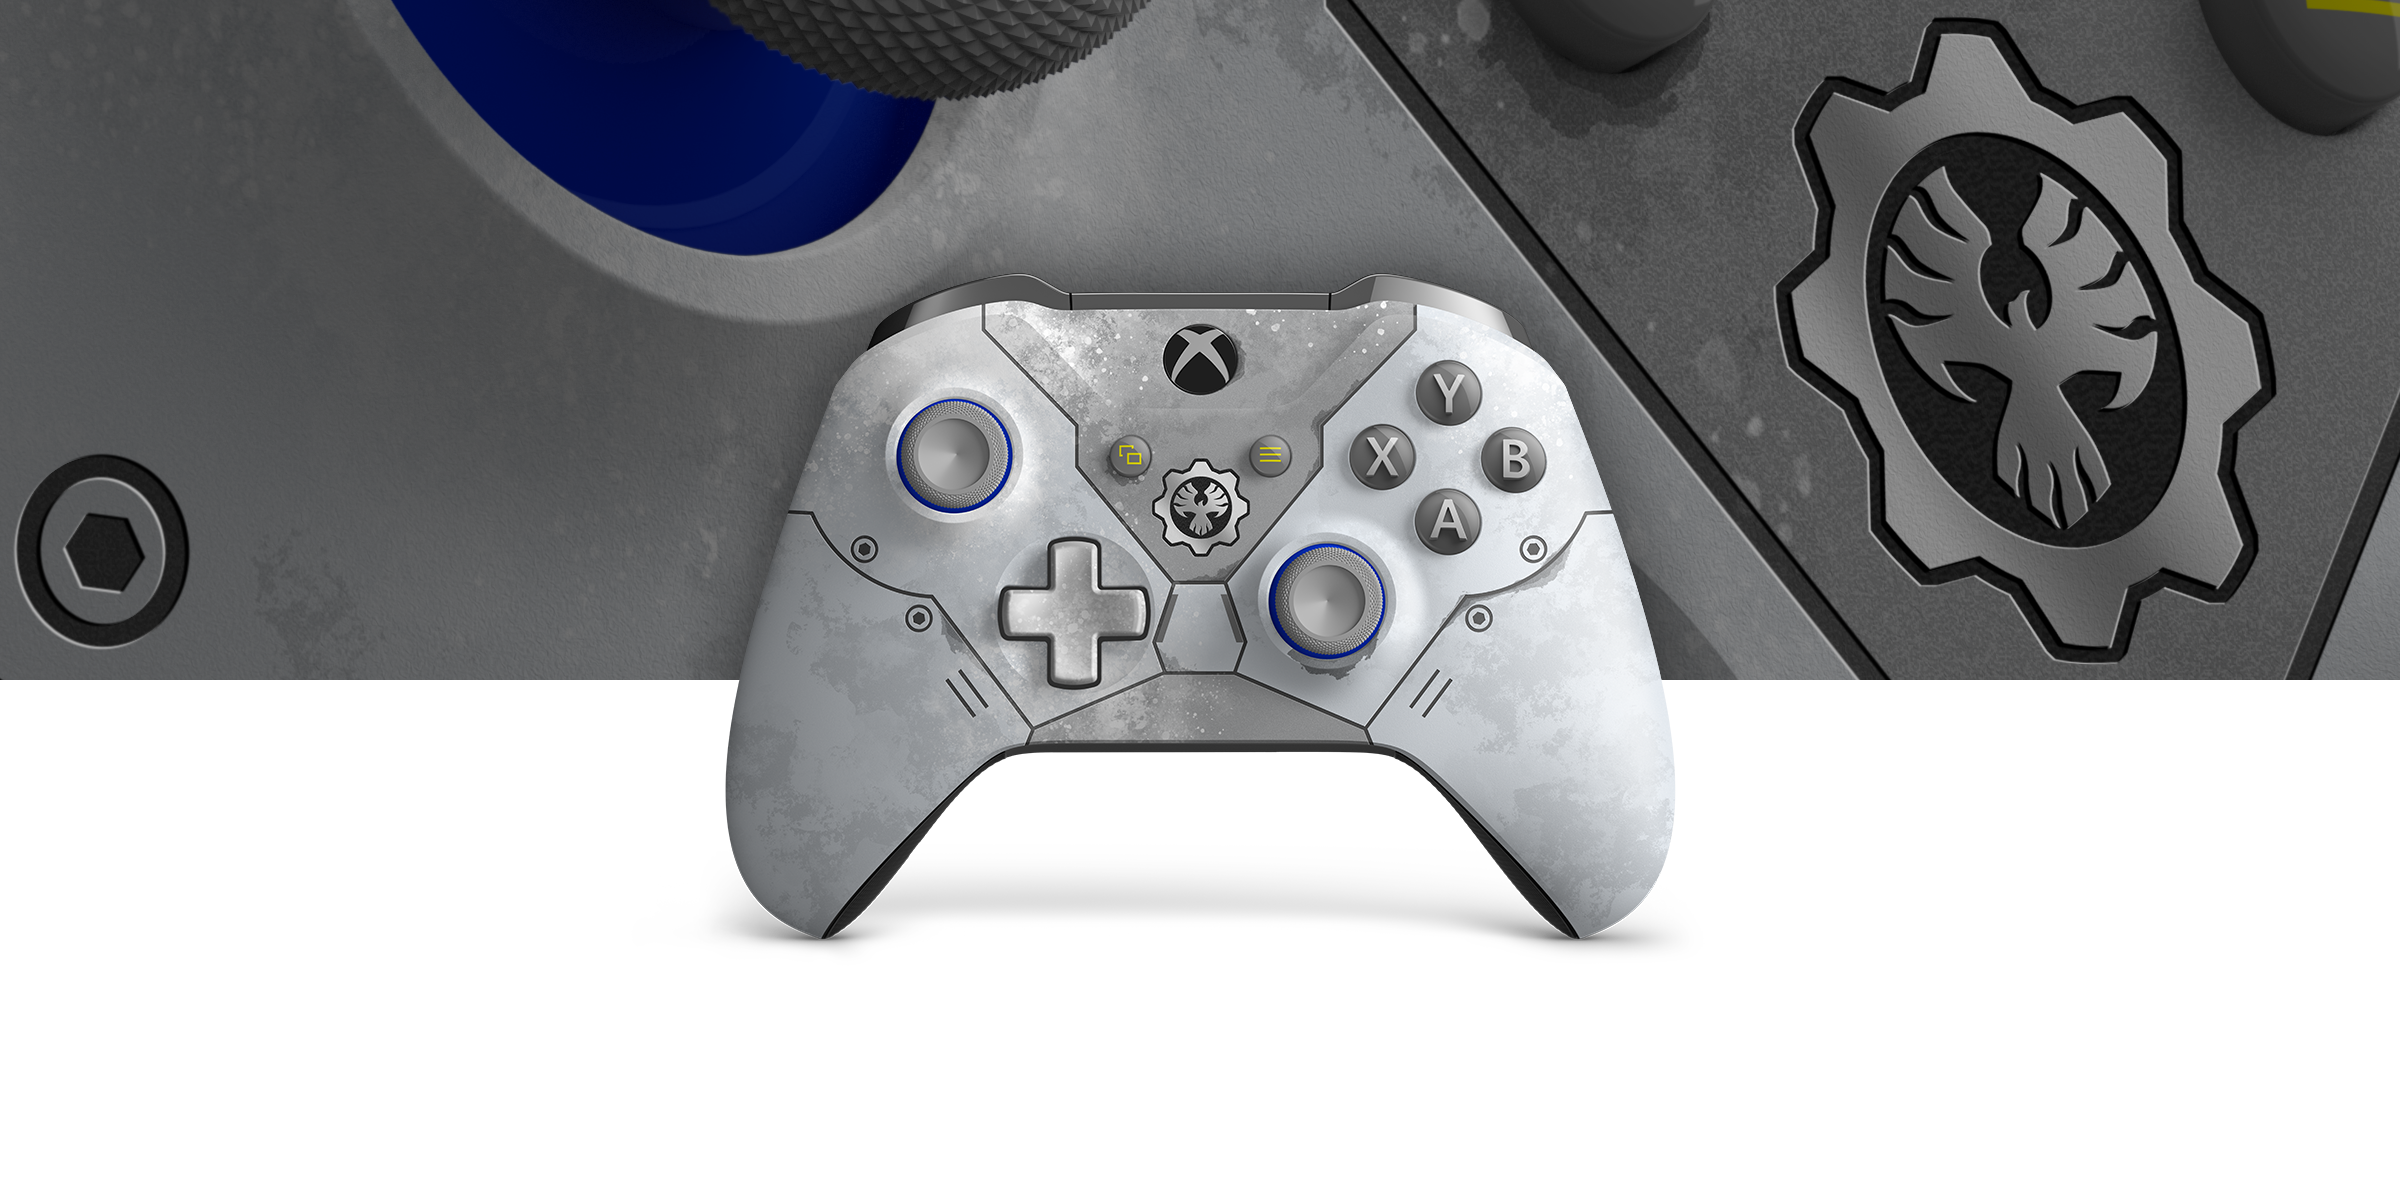 gears 5 xbox one controller